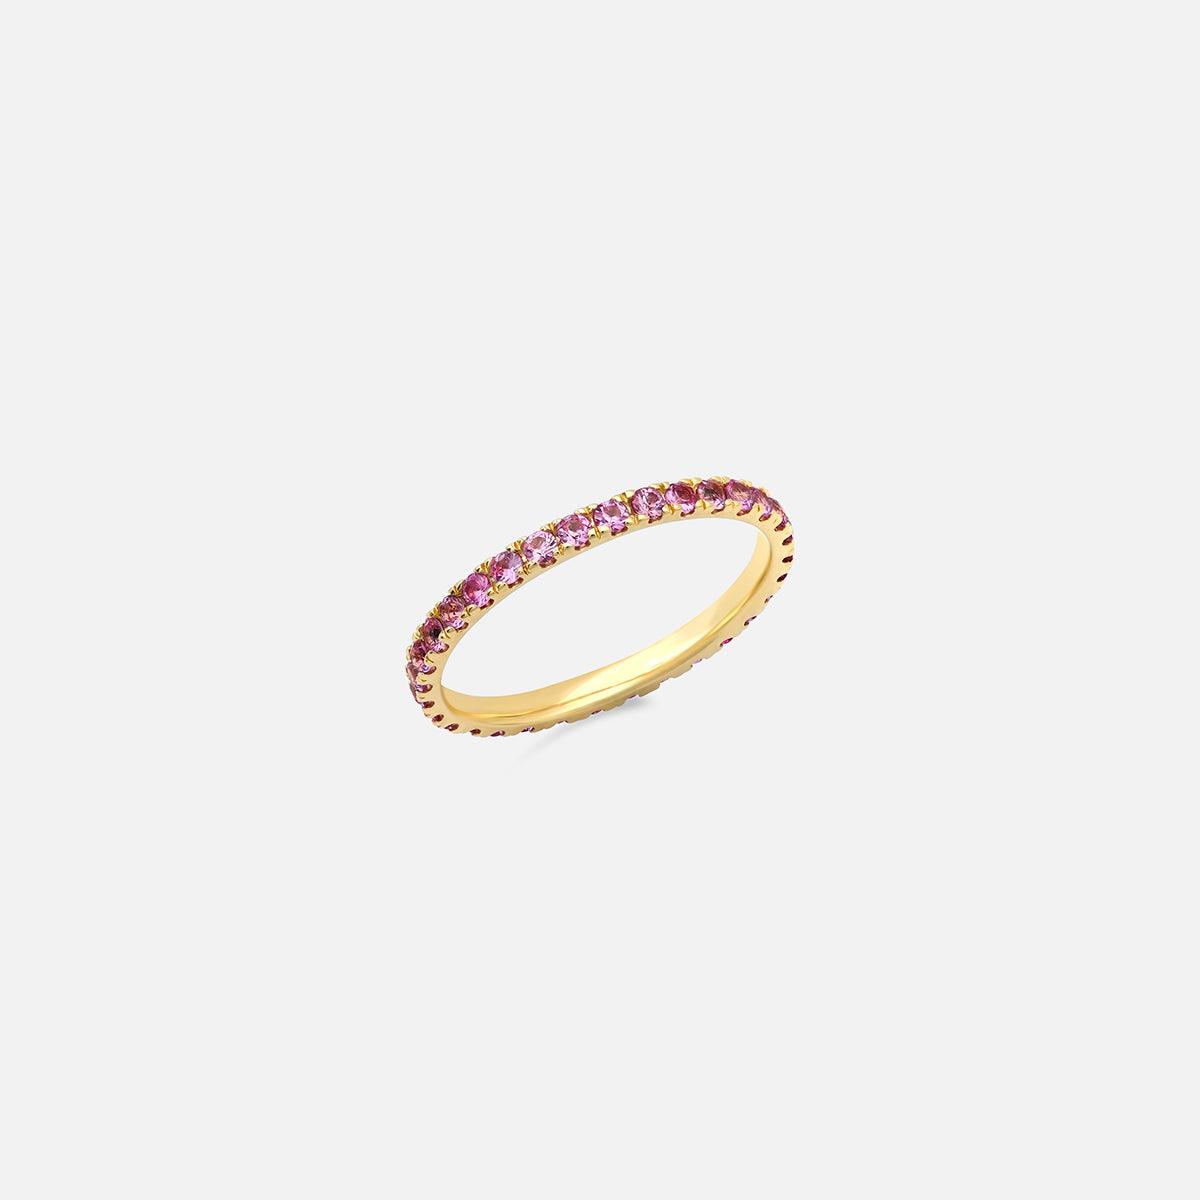 Standard Pink Sapphire Eternity Band - At Present